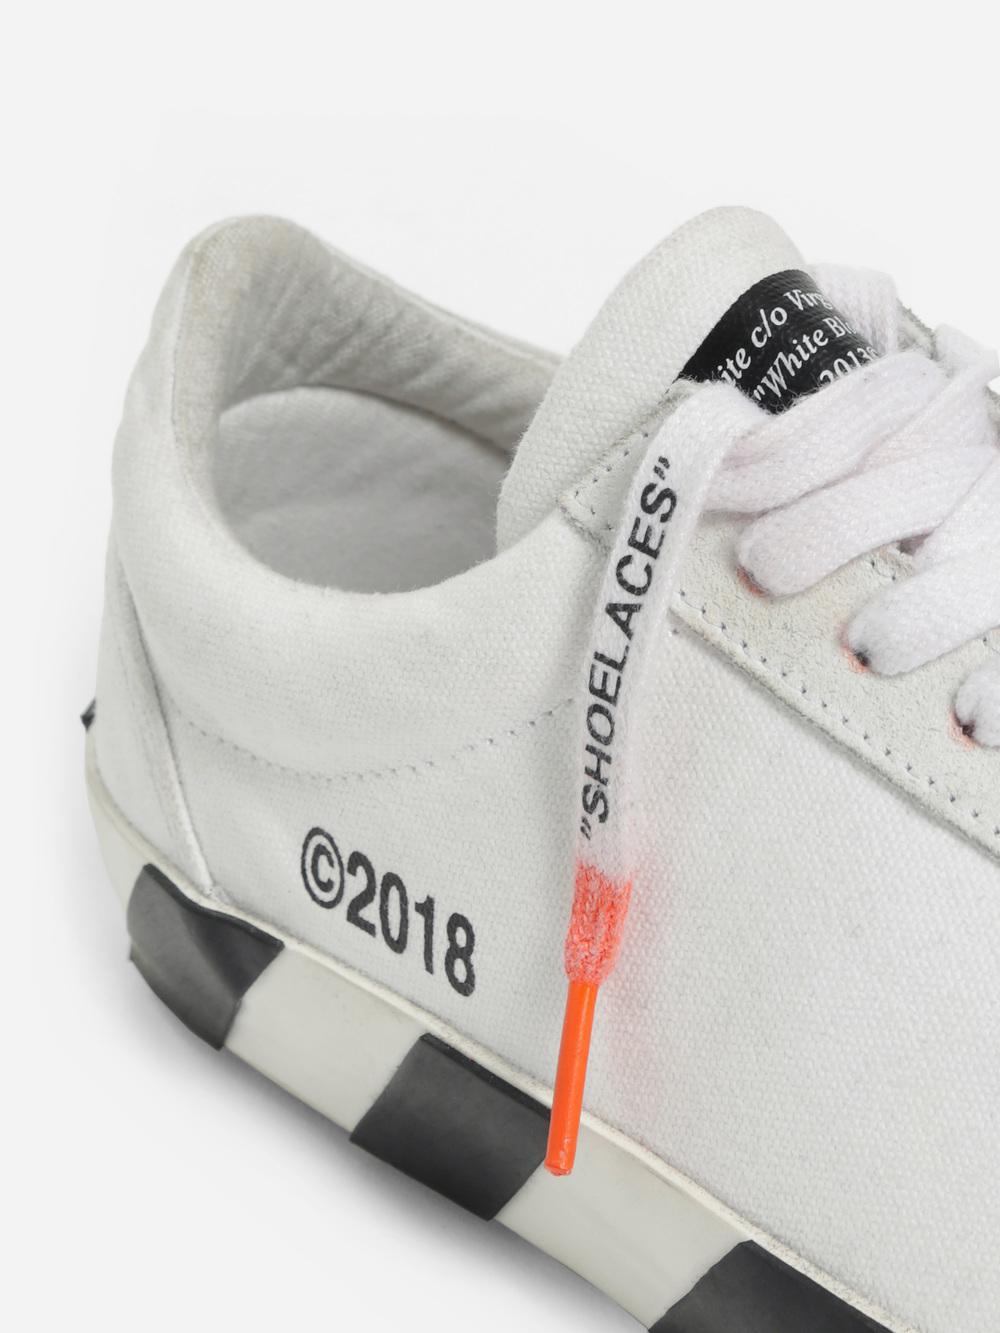 OFF-WHITE “Low Top Sneakers”